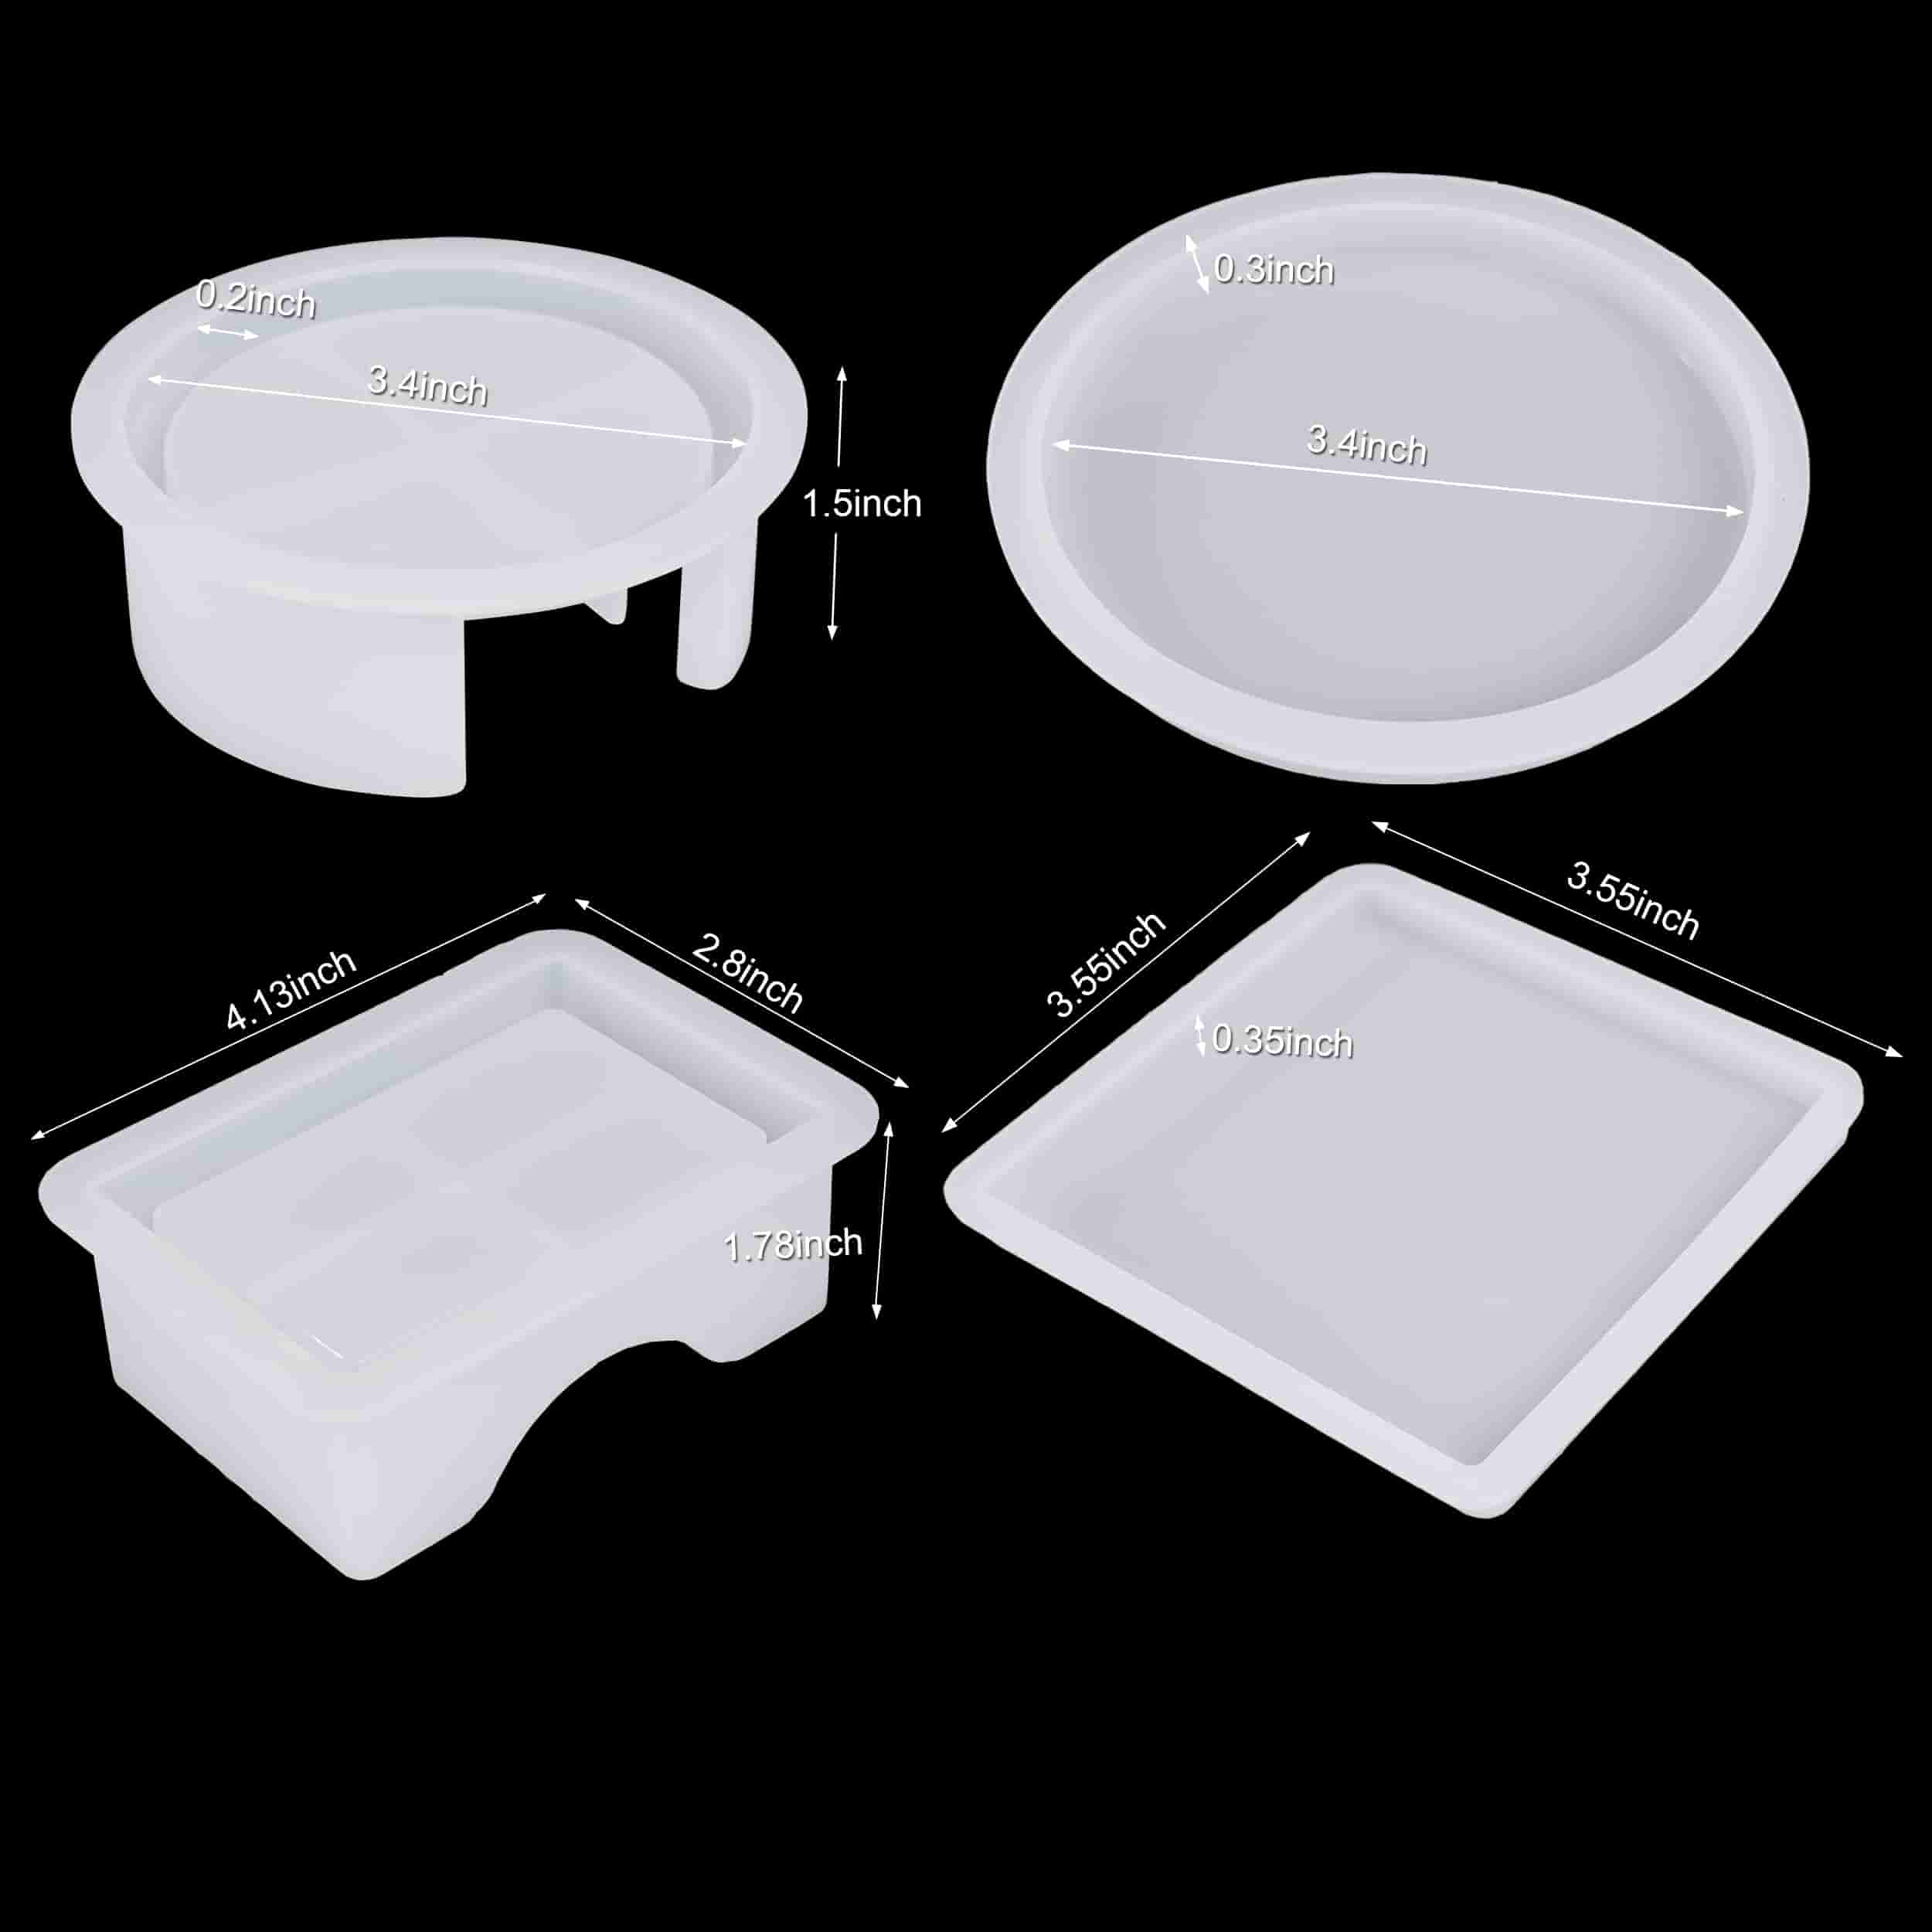 5pcs Coaster Molds with Coaster Storage Box Mold Kit Silicone Coaster Molds  for Resin Epoxy Casting Square Round Cup pad Mould